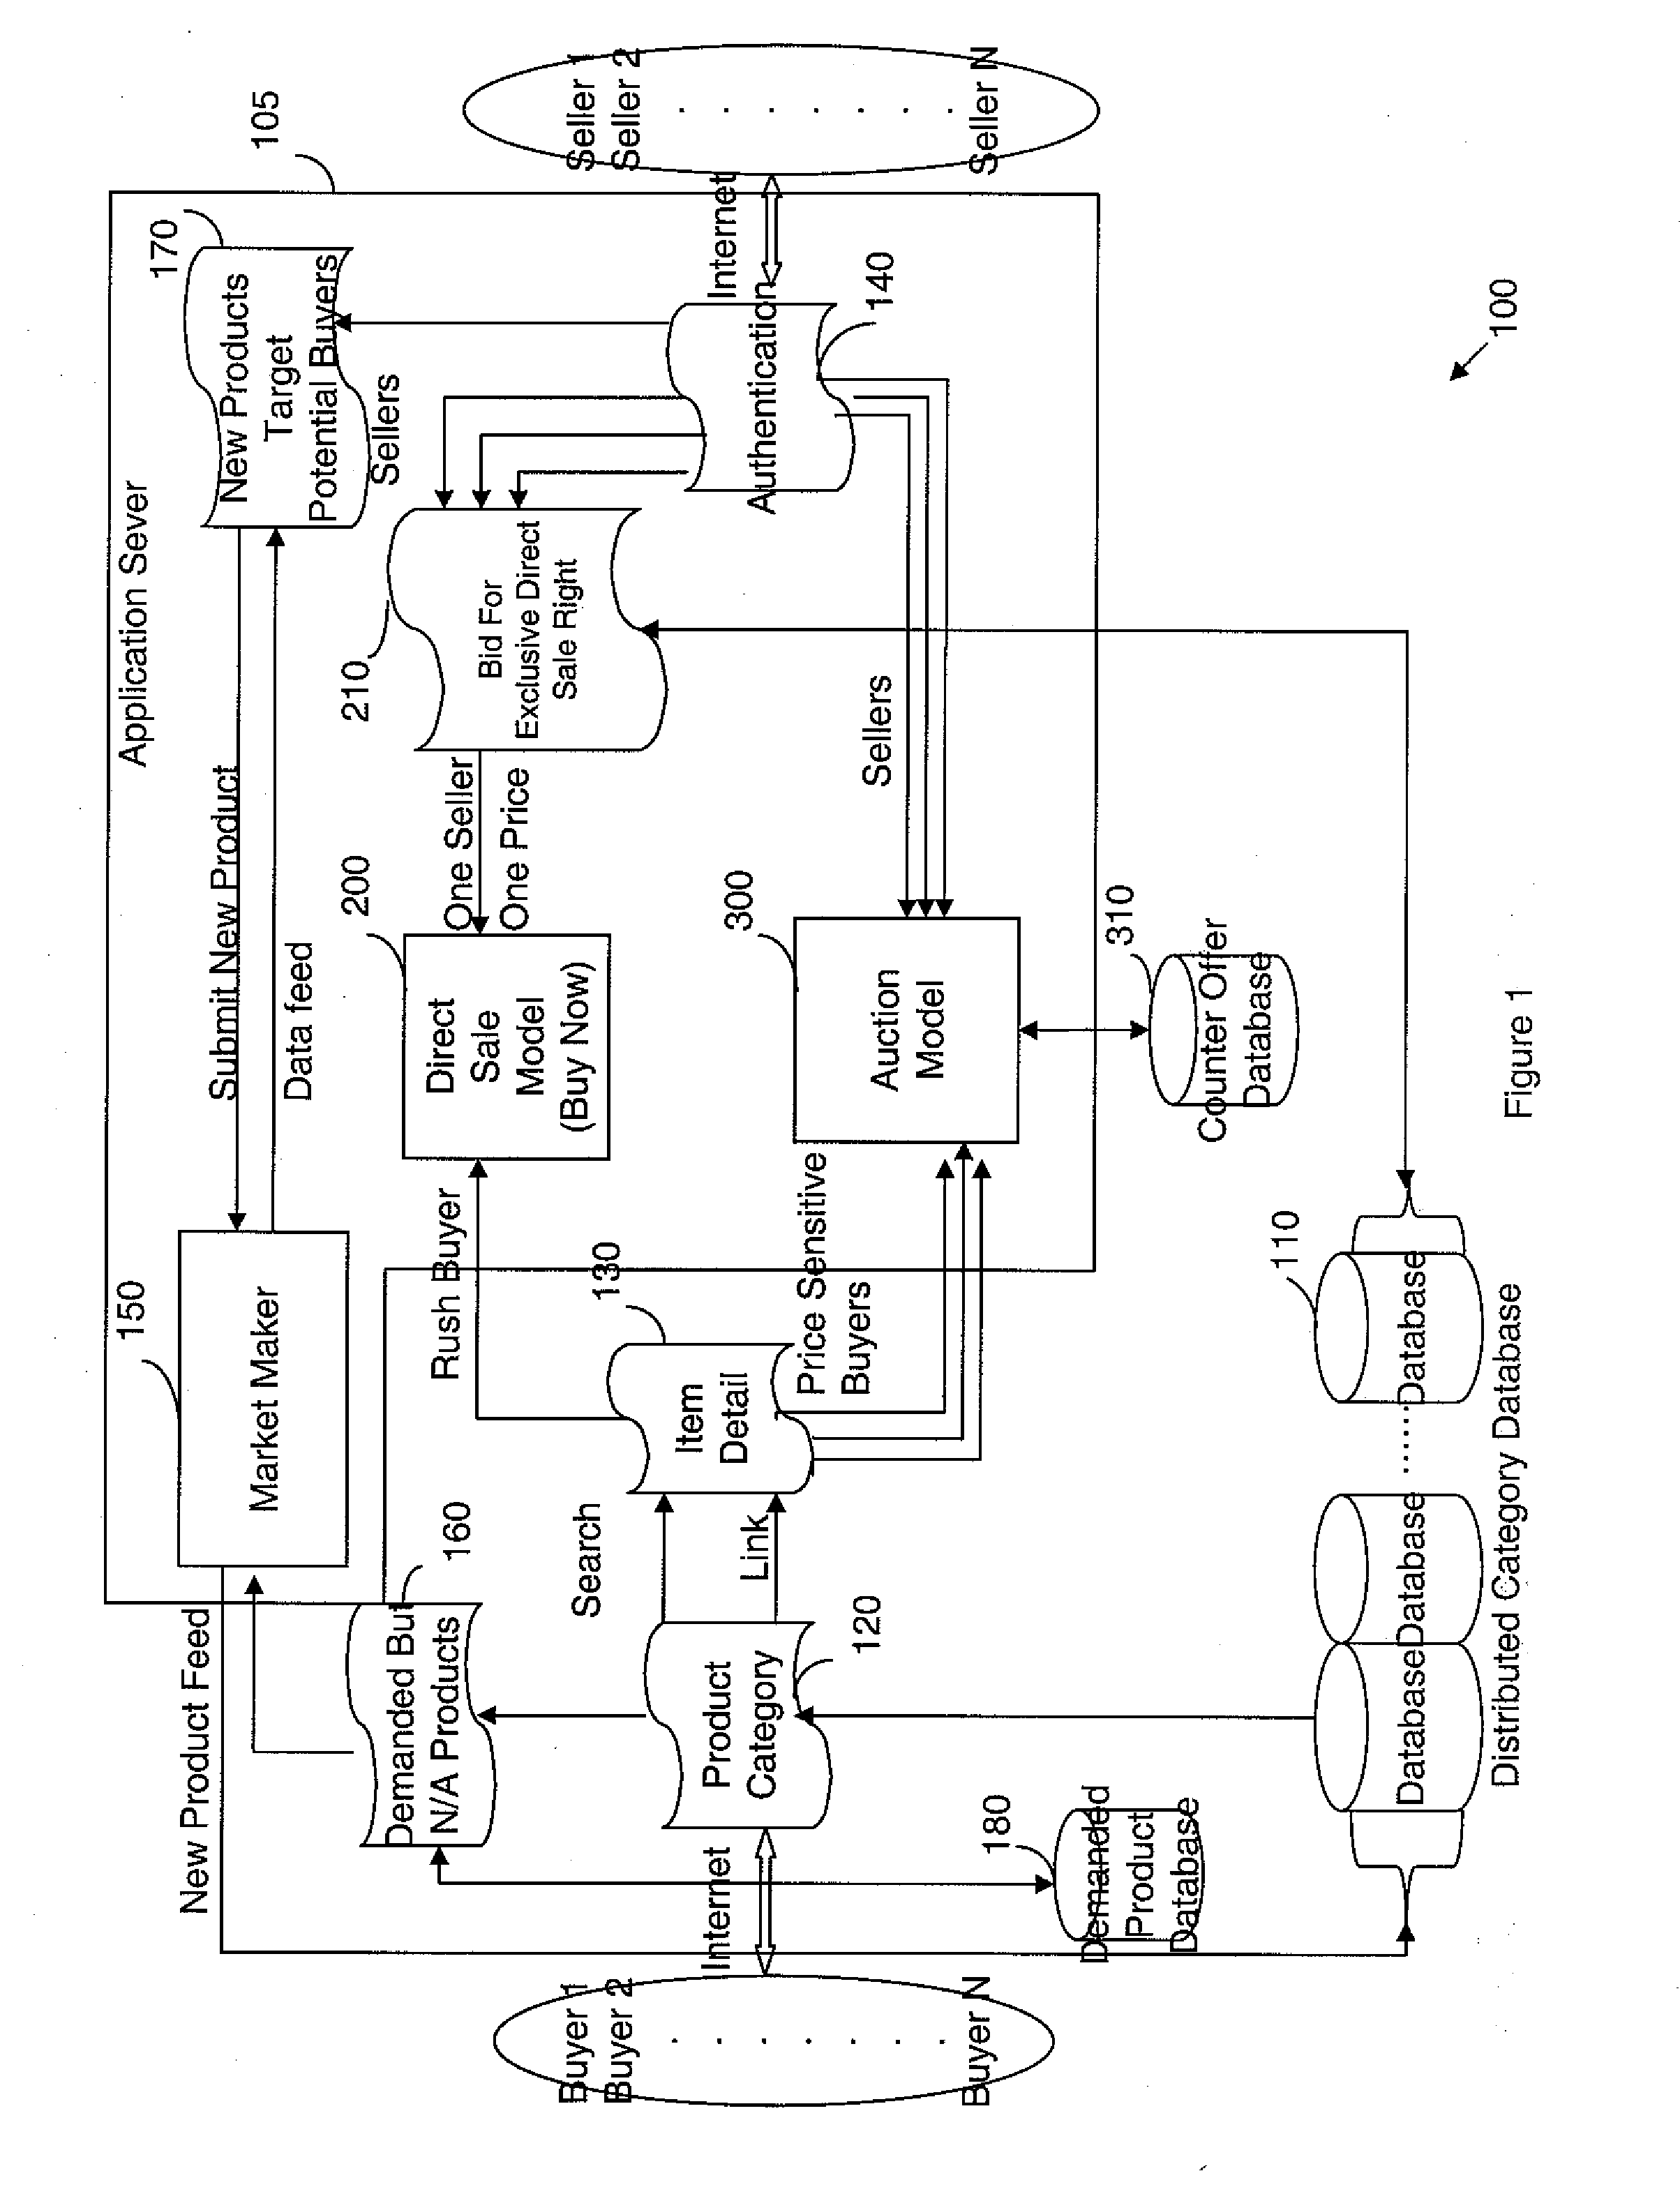 System and method for accelerating convergence between buyers and sellers of products